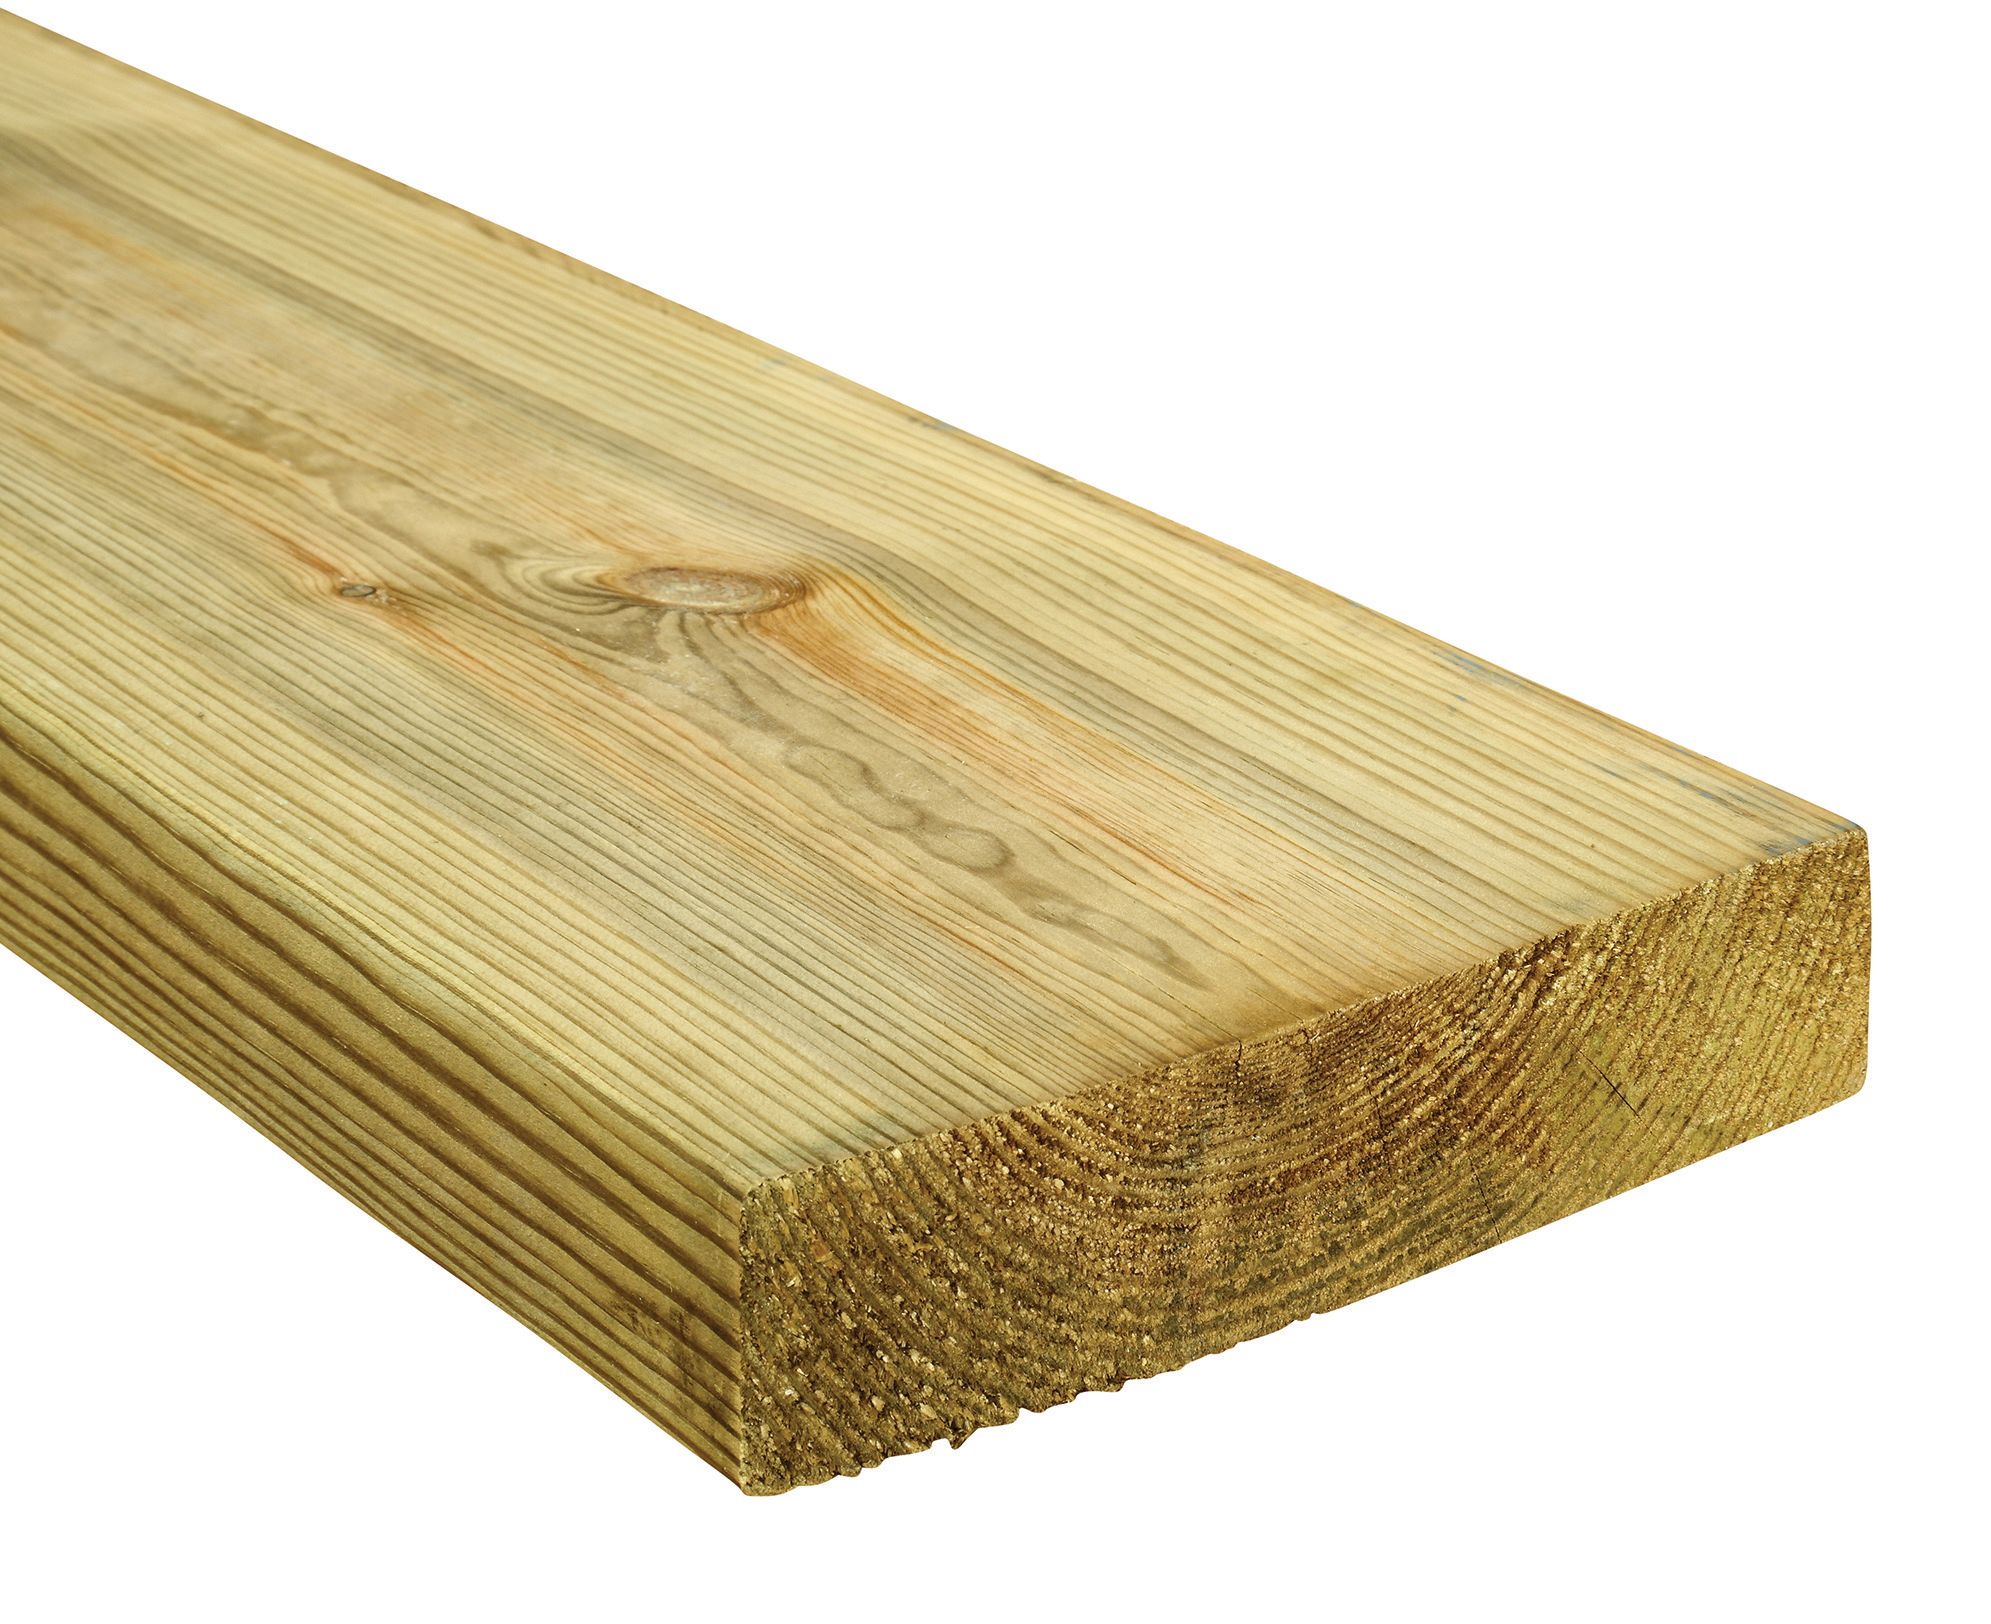 Image of Wickes Treated Kiln Dried C24 Regularised Timber - 45 x 195 x 3600mm